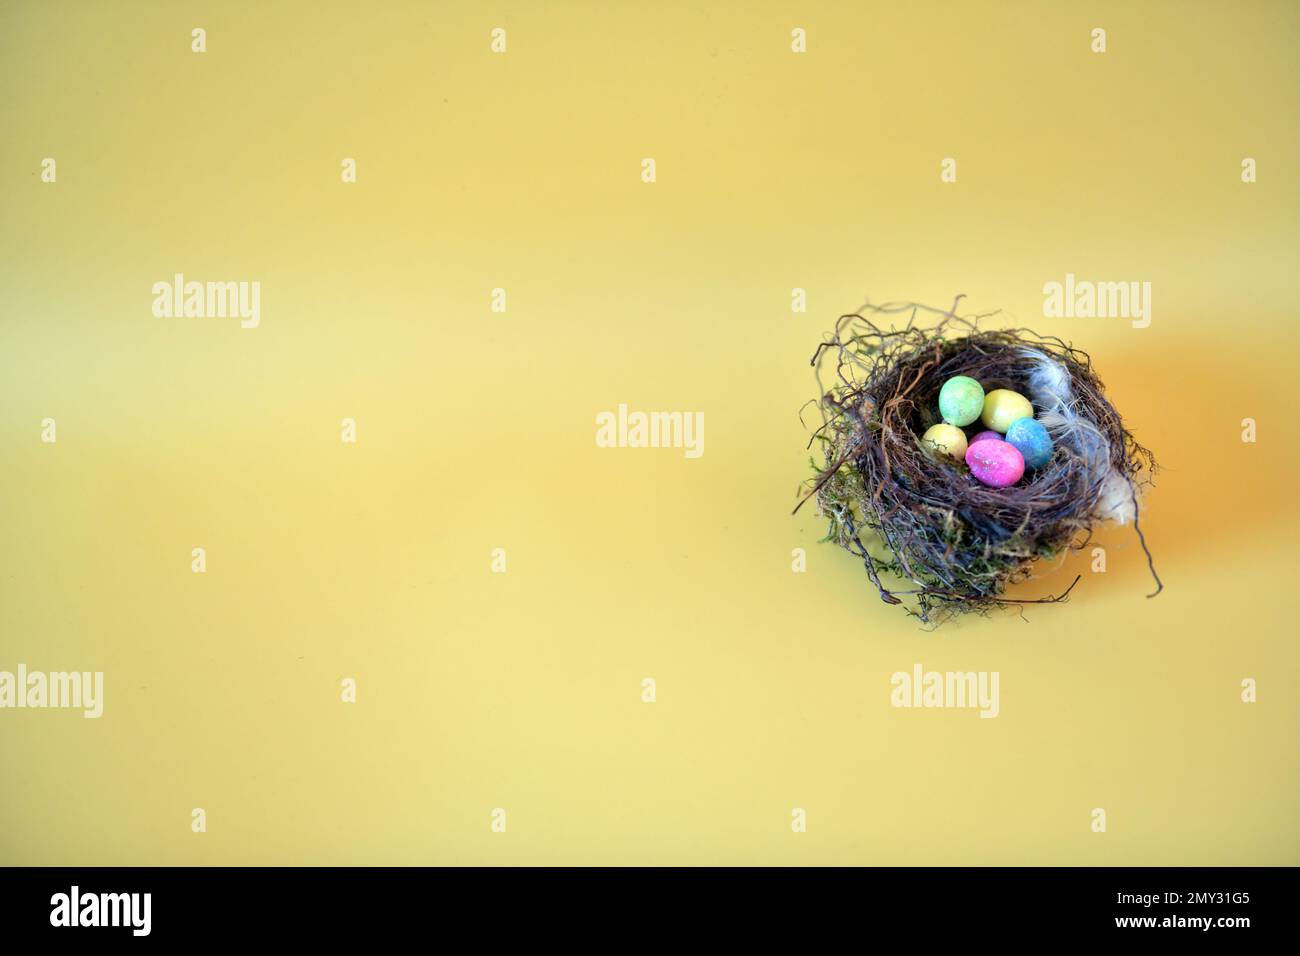 Small bird's nest and artificial eggs on yellow surface.  Copy space to the left. Stock Photo